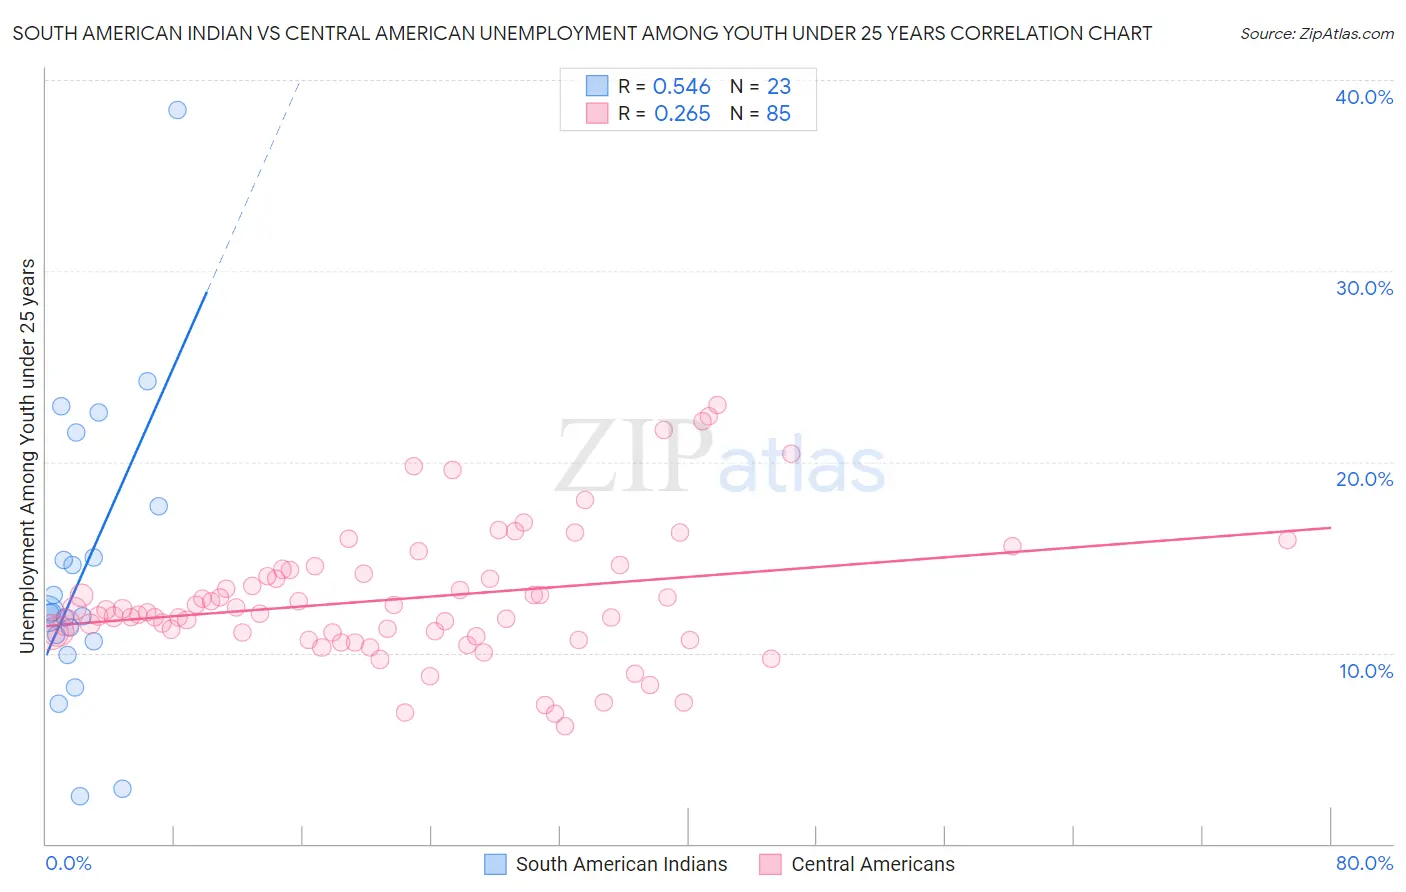 South American Indian vs Central American Unemployment Among Youth under 25 years